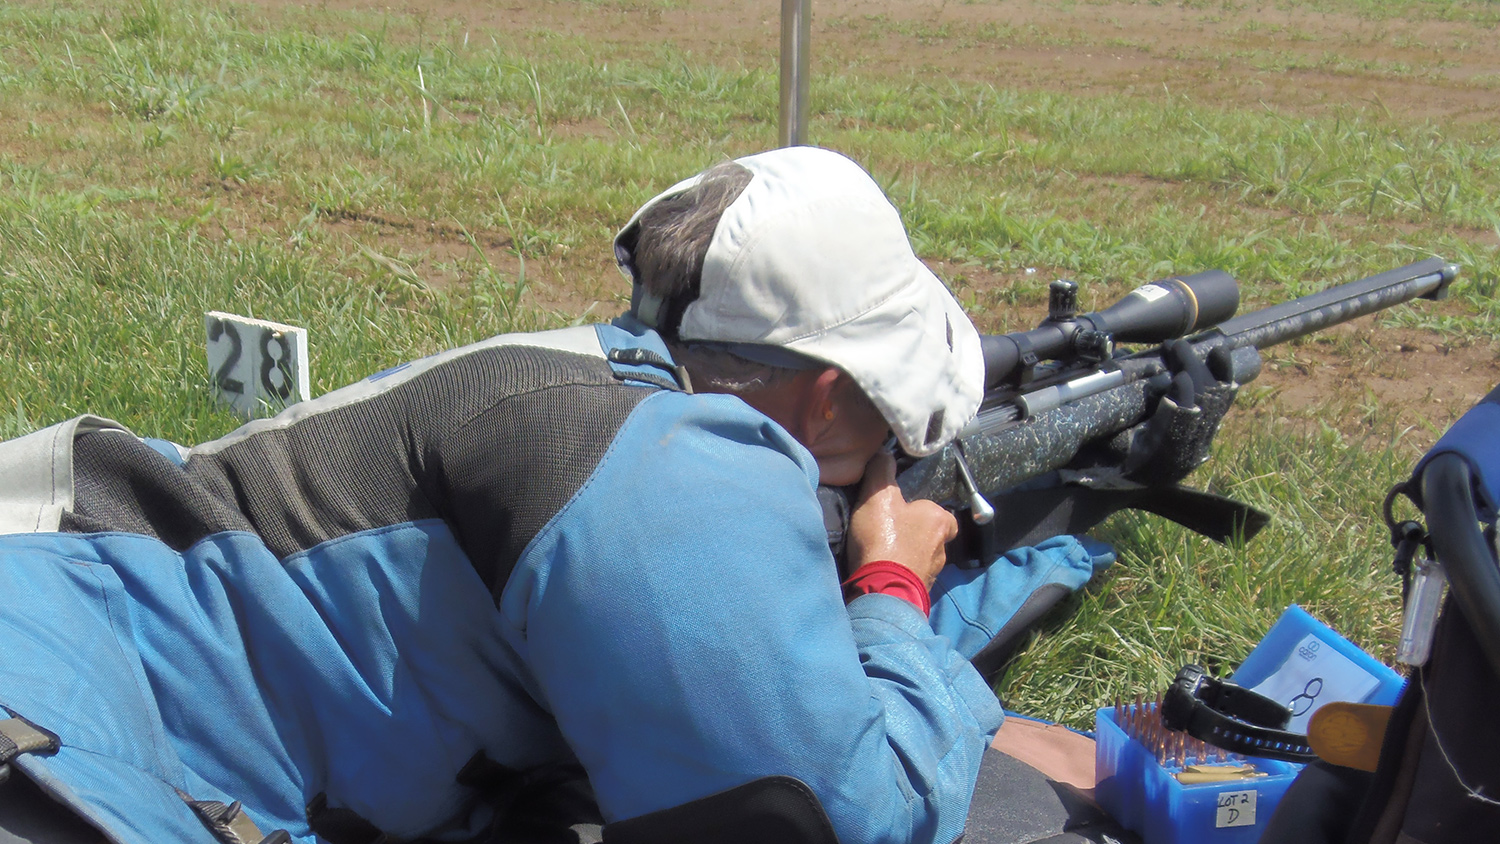 Norm Crawford, NRA High Power Rifle Competitor at Camp Atterbury in 2017